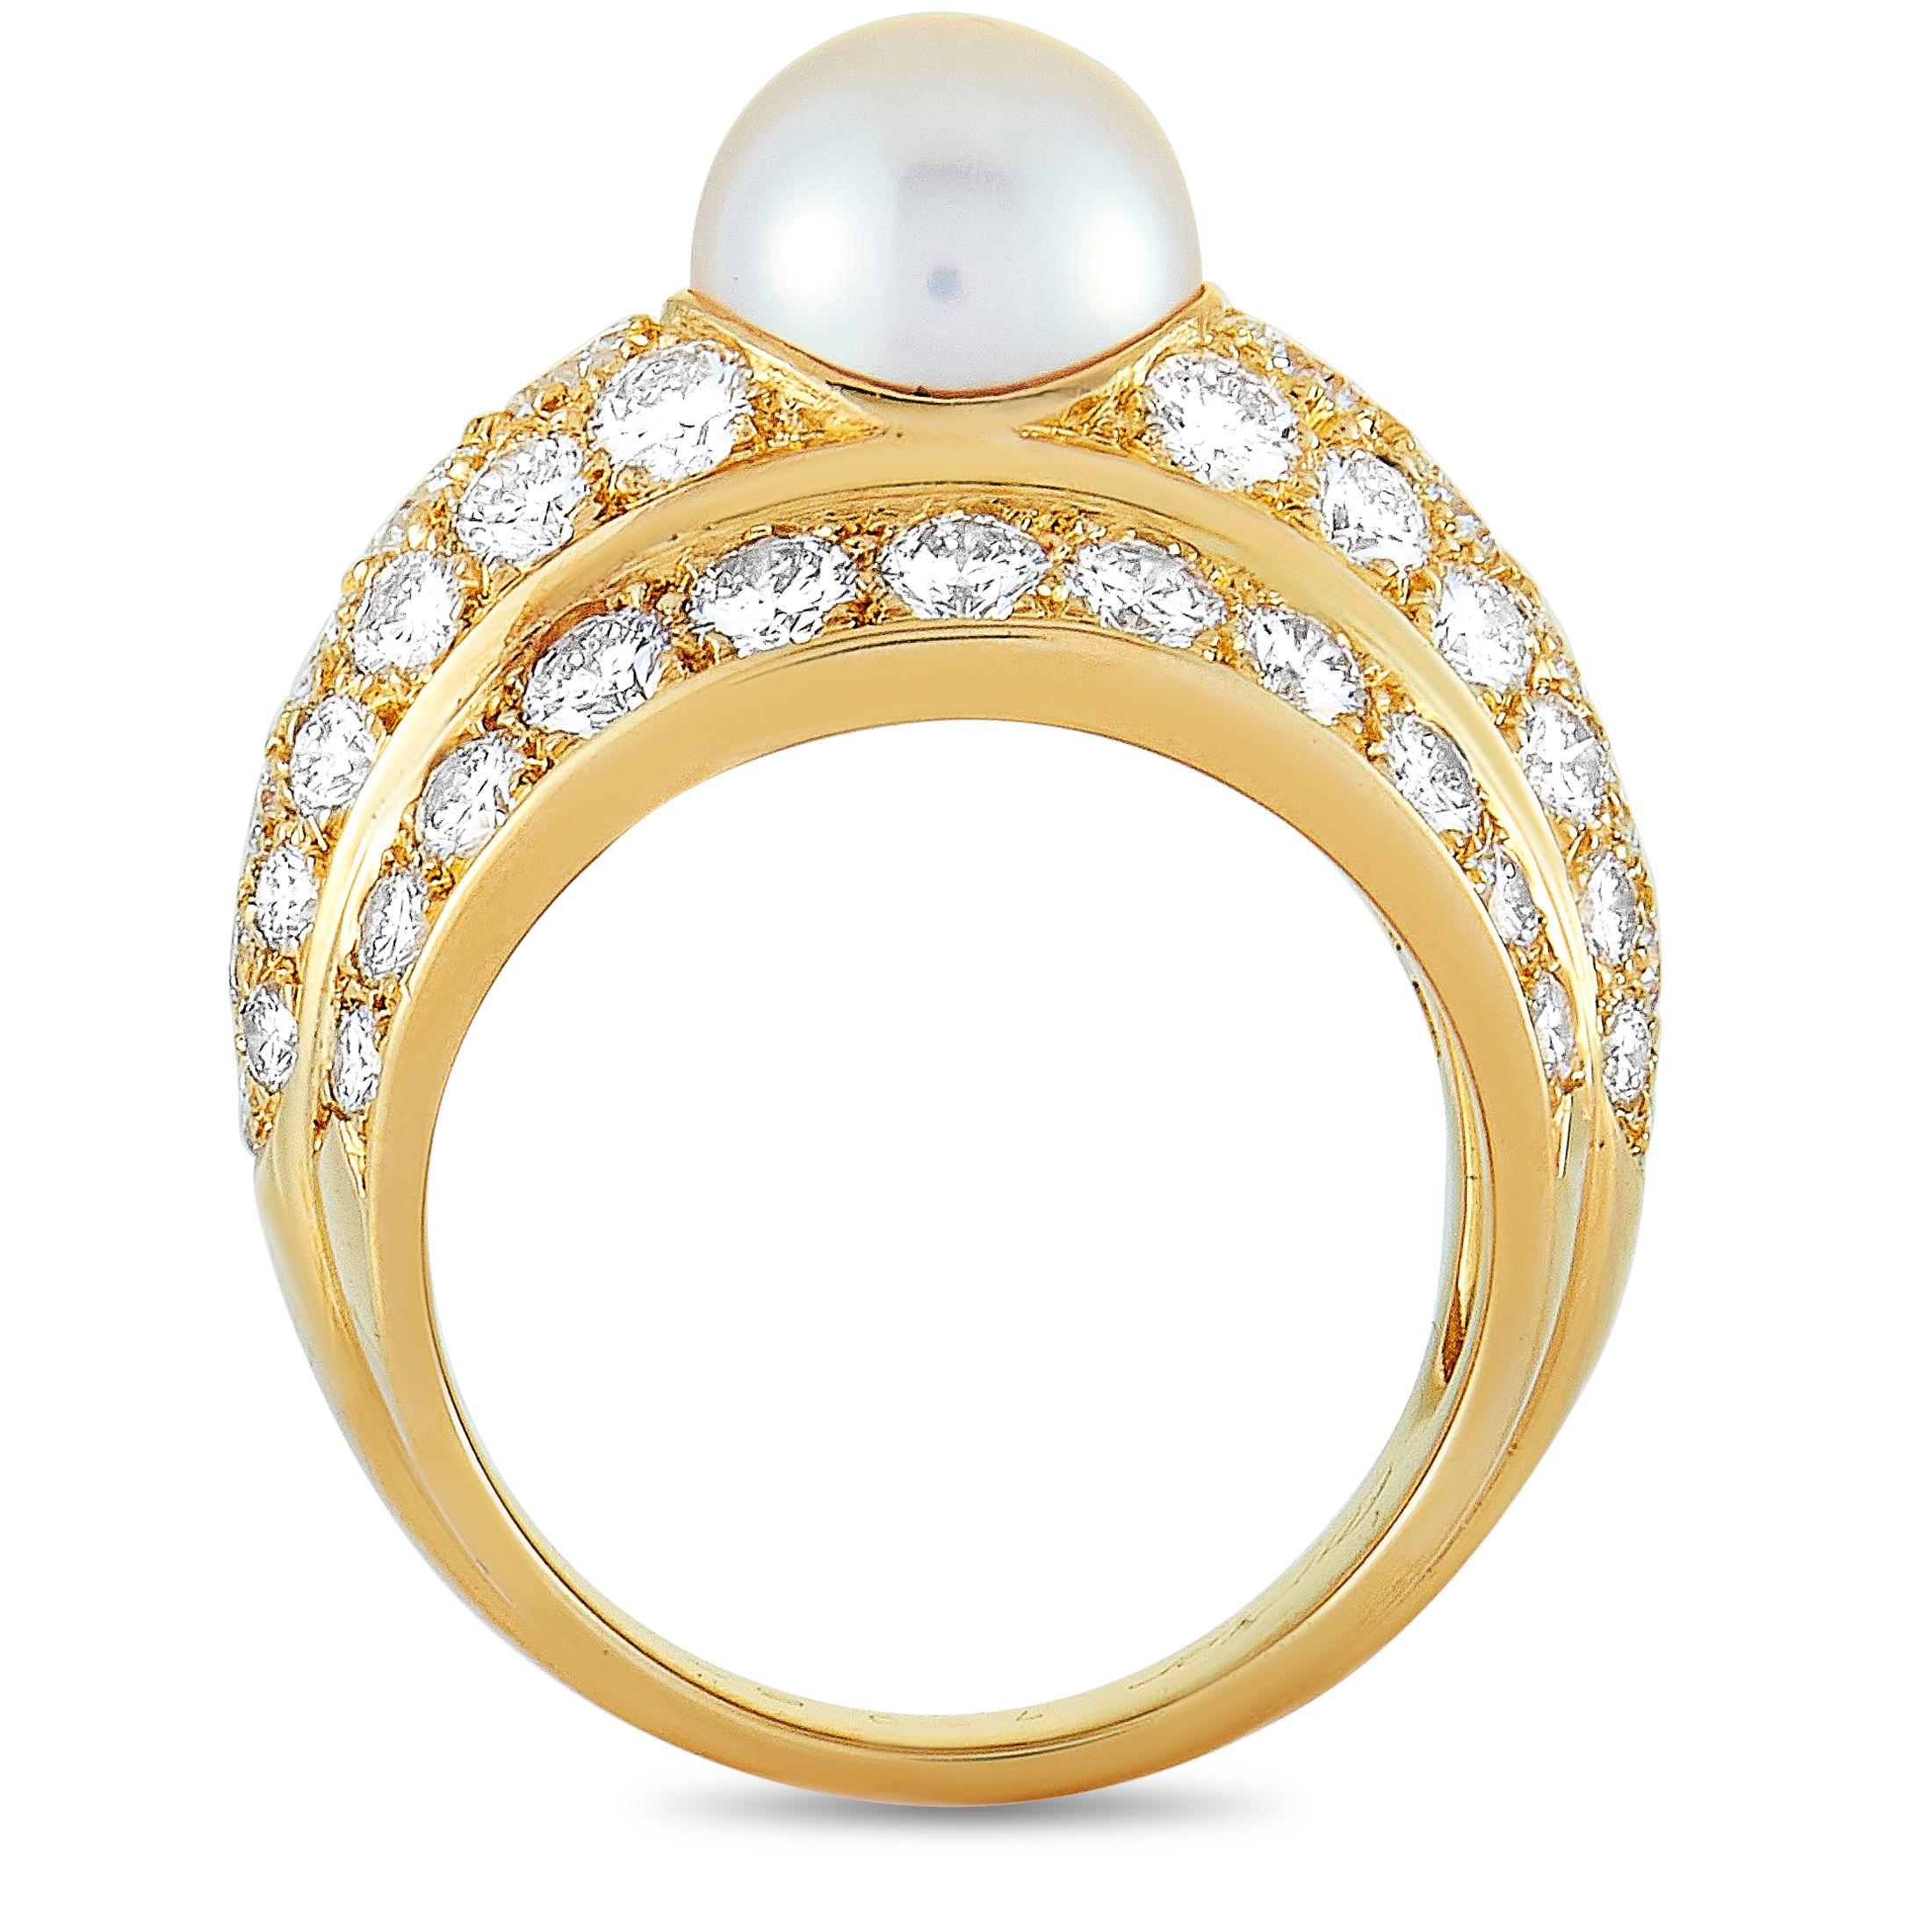 The Cartier “Nigeria” ring is crafted from 18K yellow gold and embellished with diamonds and a pearl. The diamonds amount to approximately 2.00 carats and feature grade E color and VVS clarity. The ring weighs 11.7 grams, boasting band thickness of